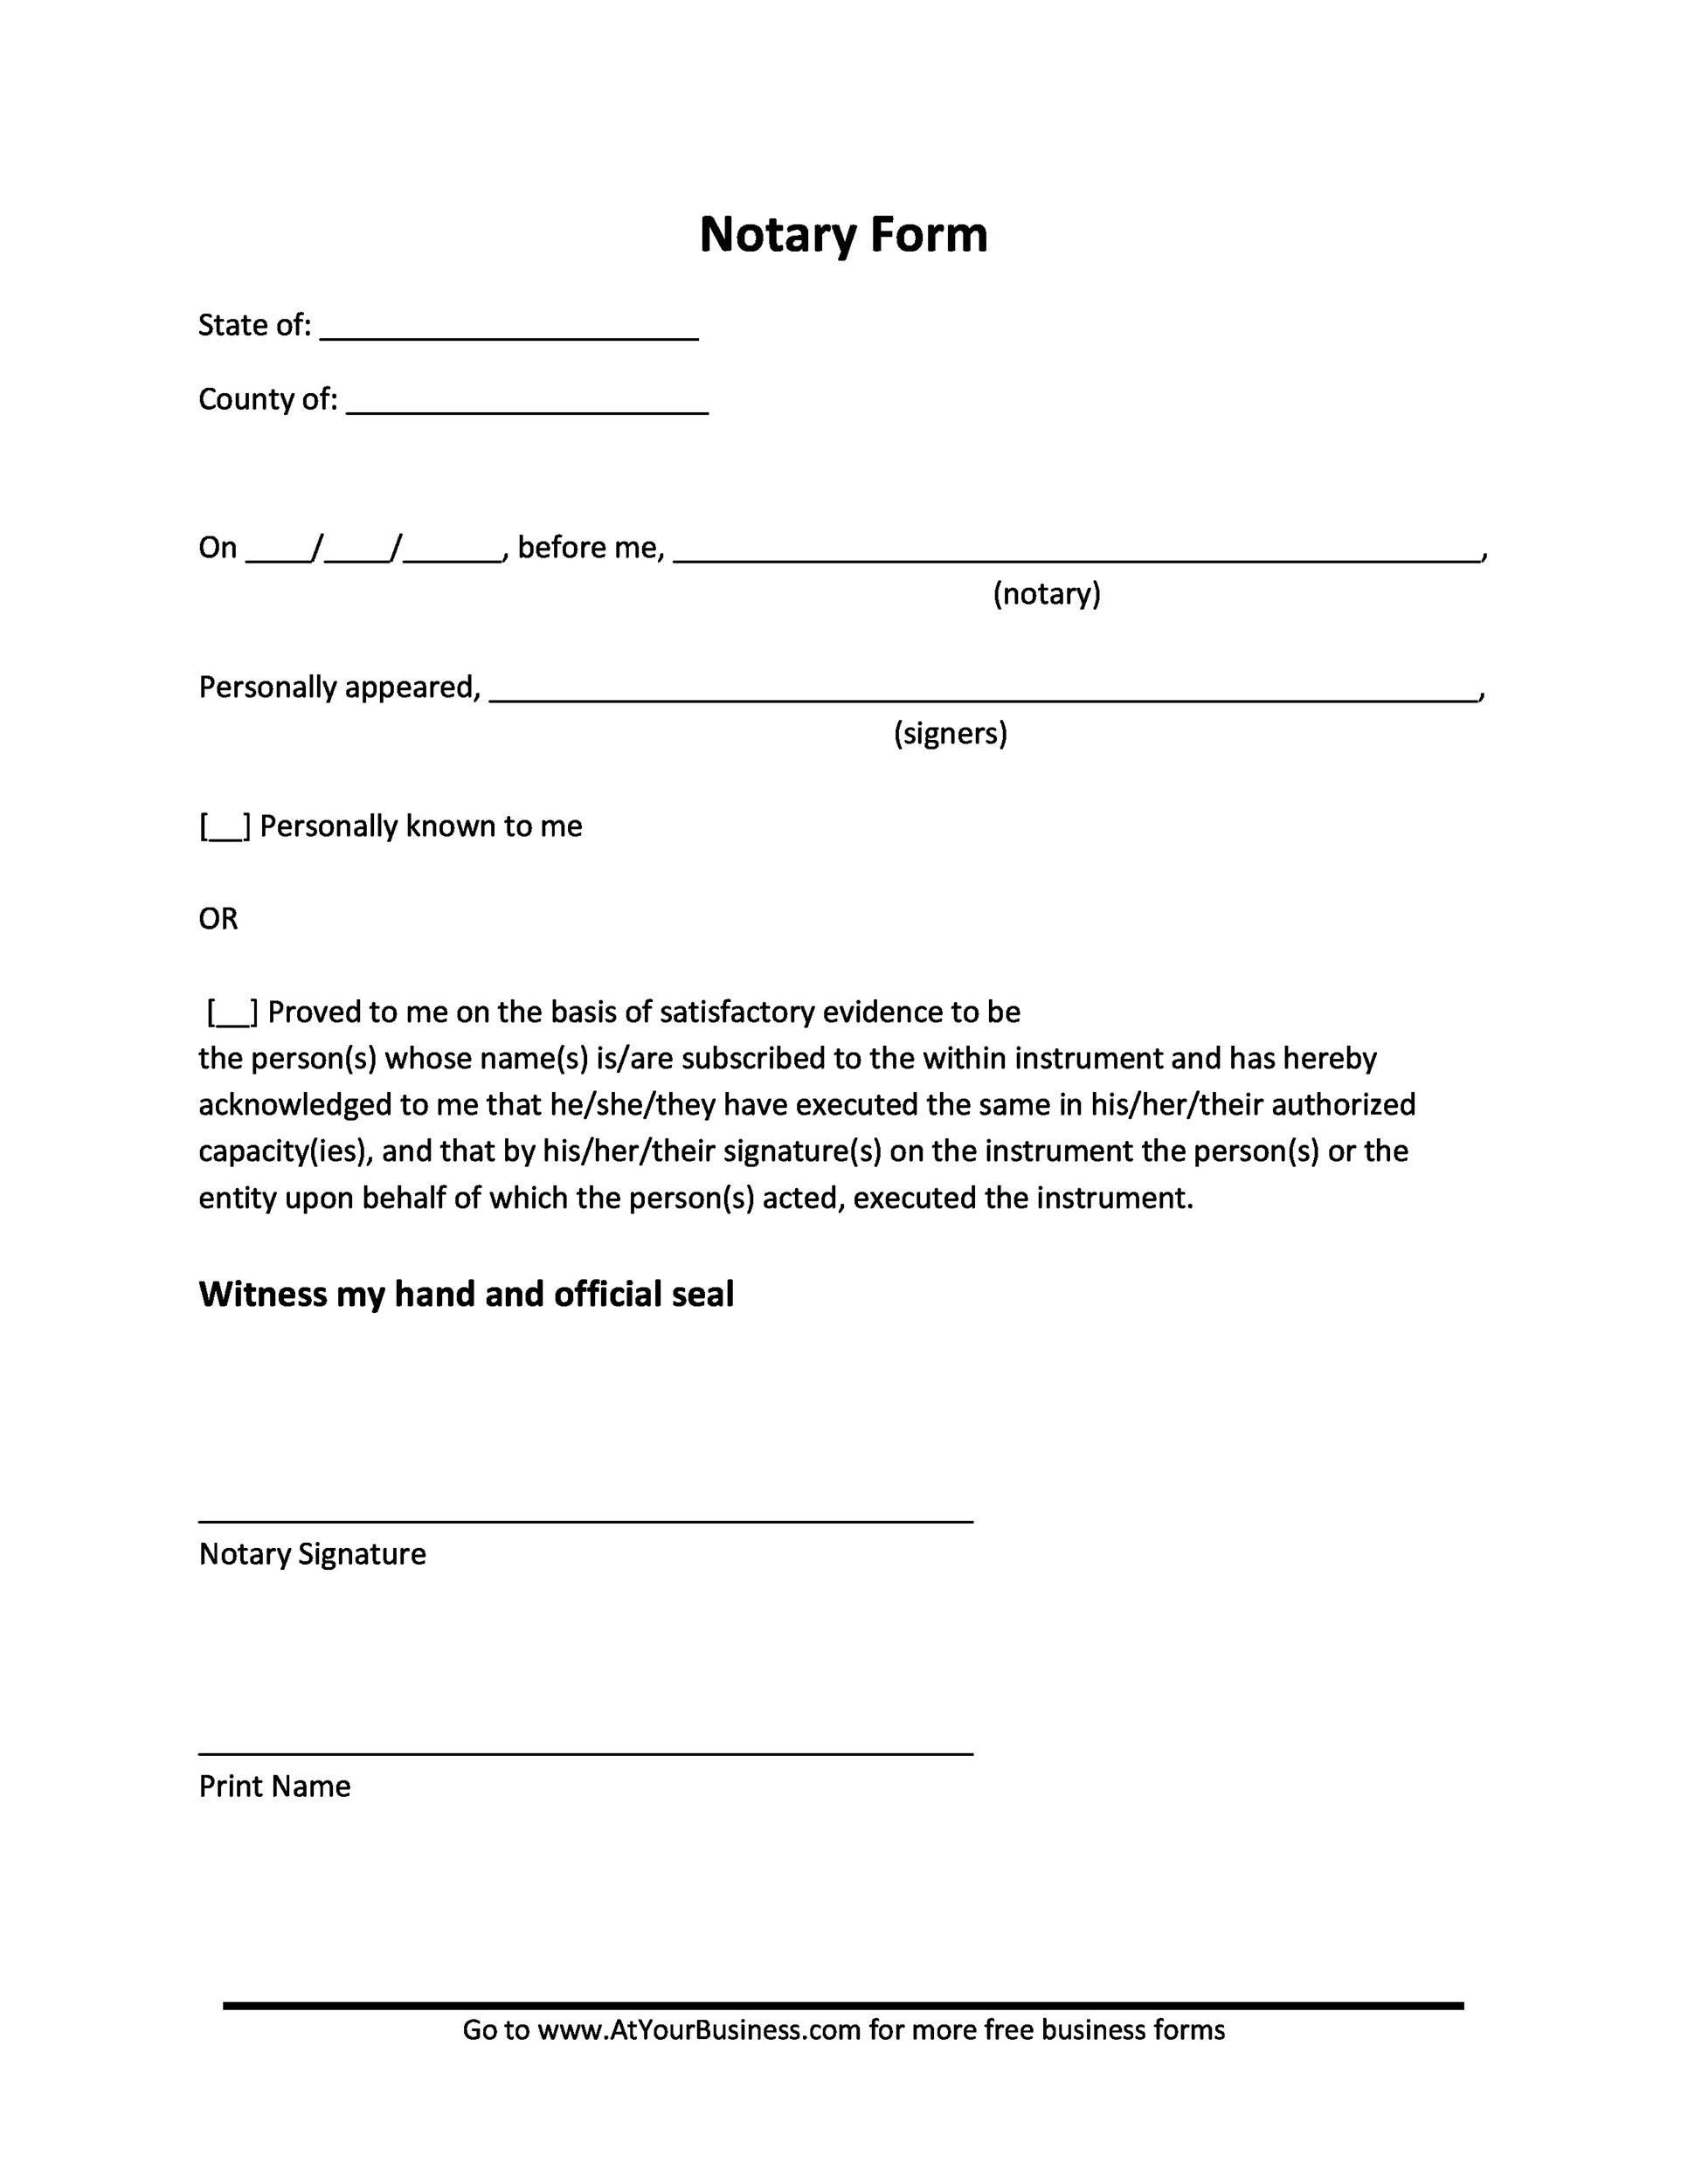 notarized-letter-sample-notarised-document-master-of-template-document